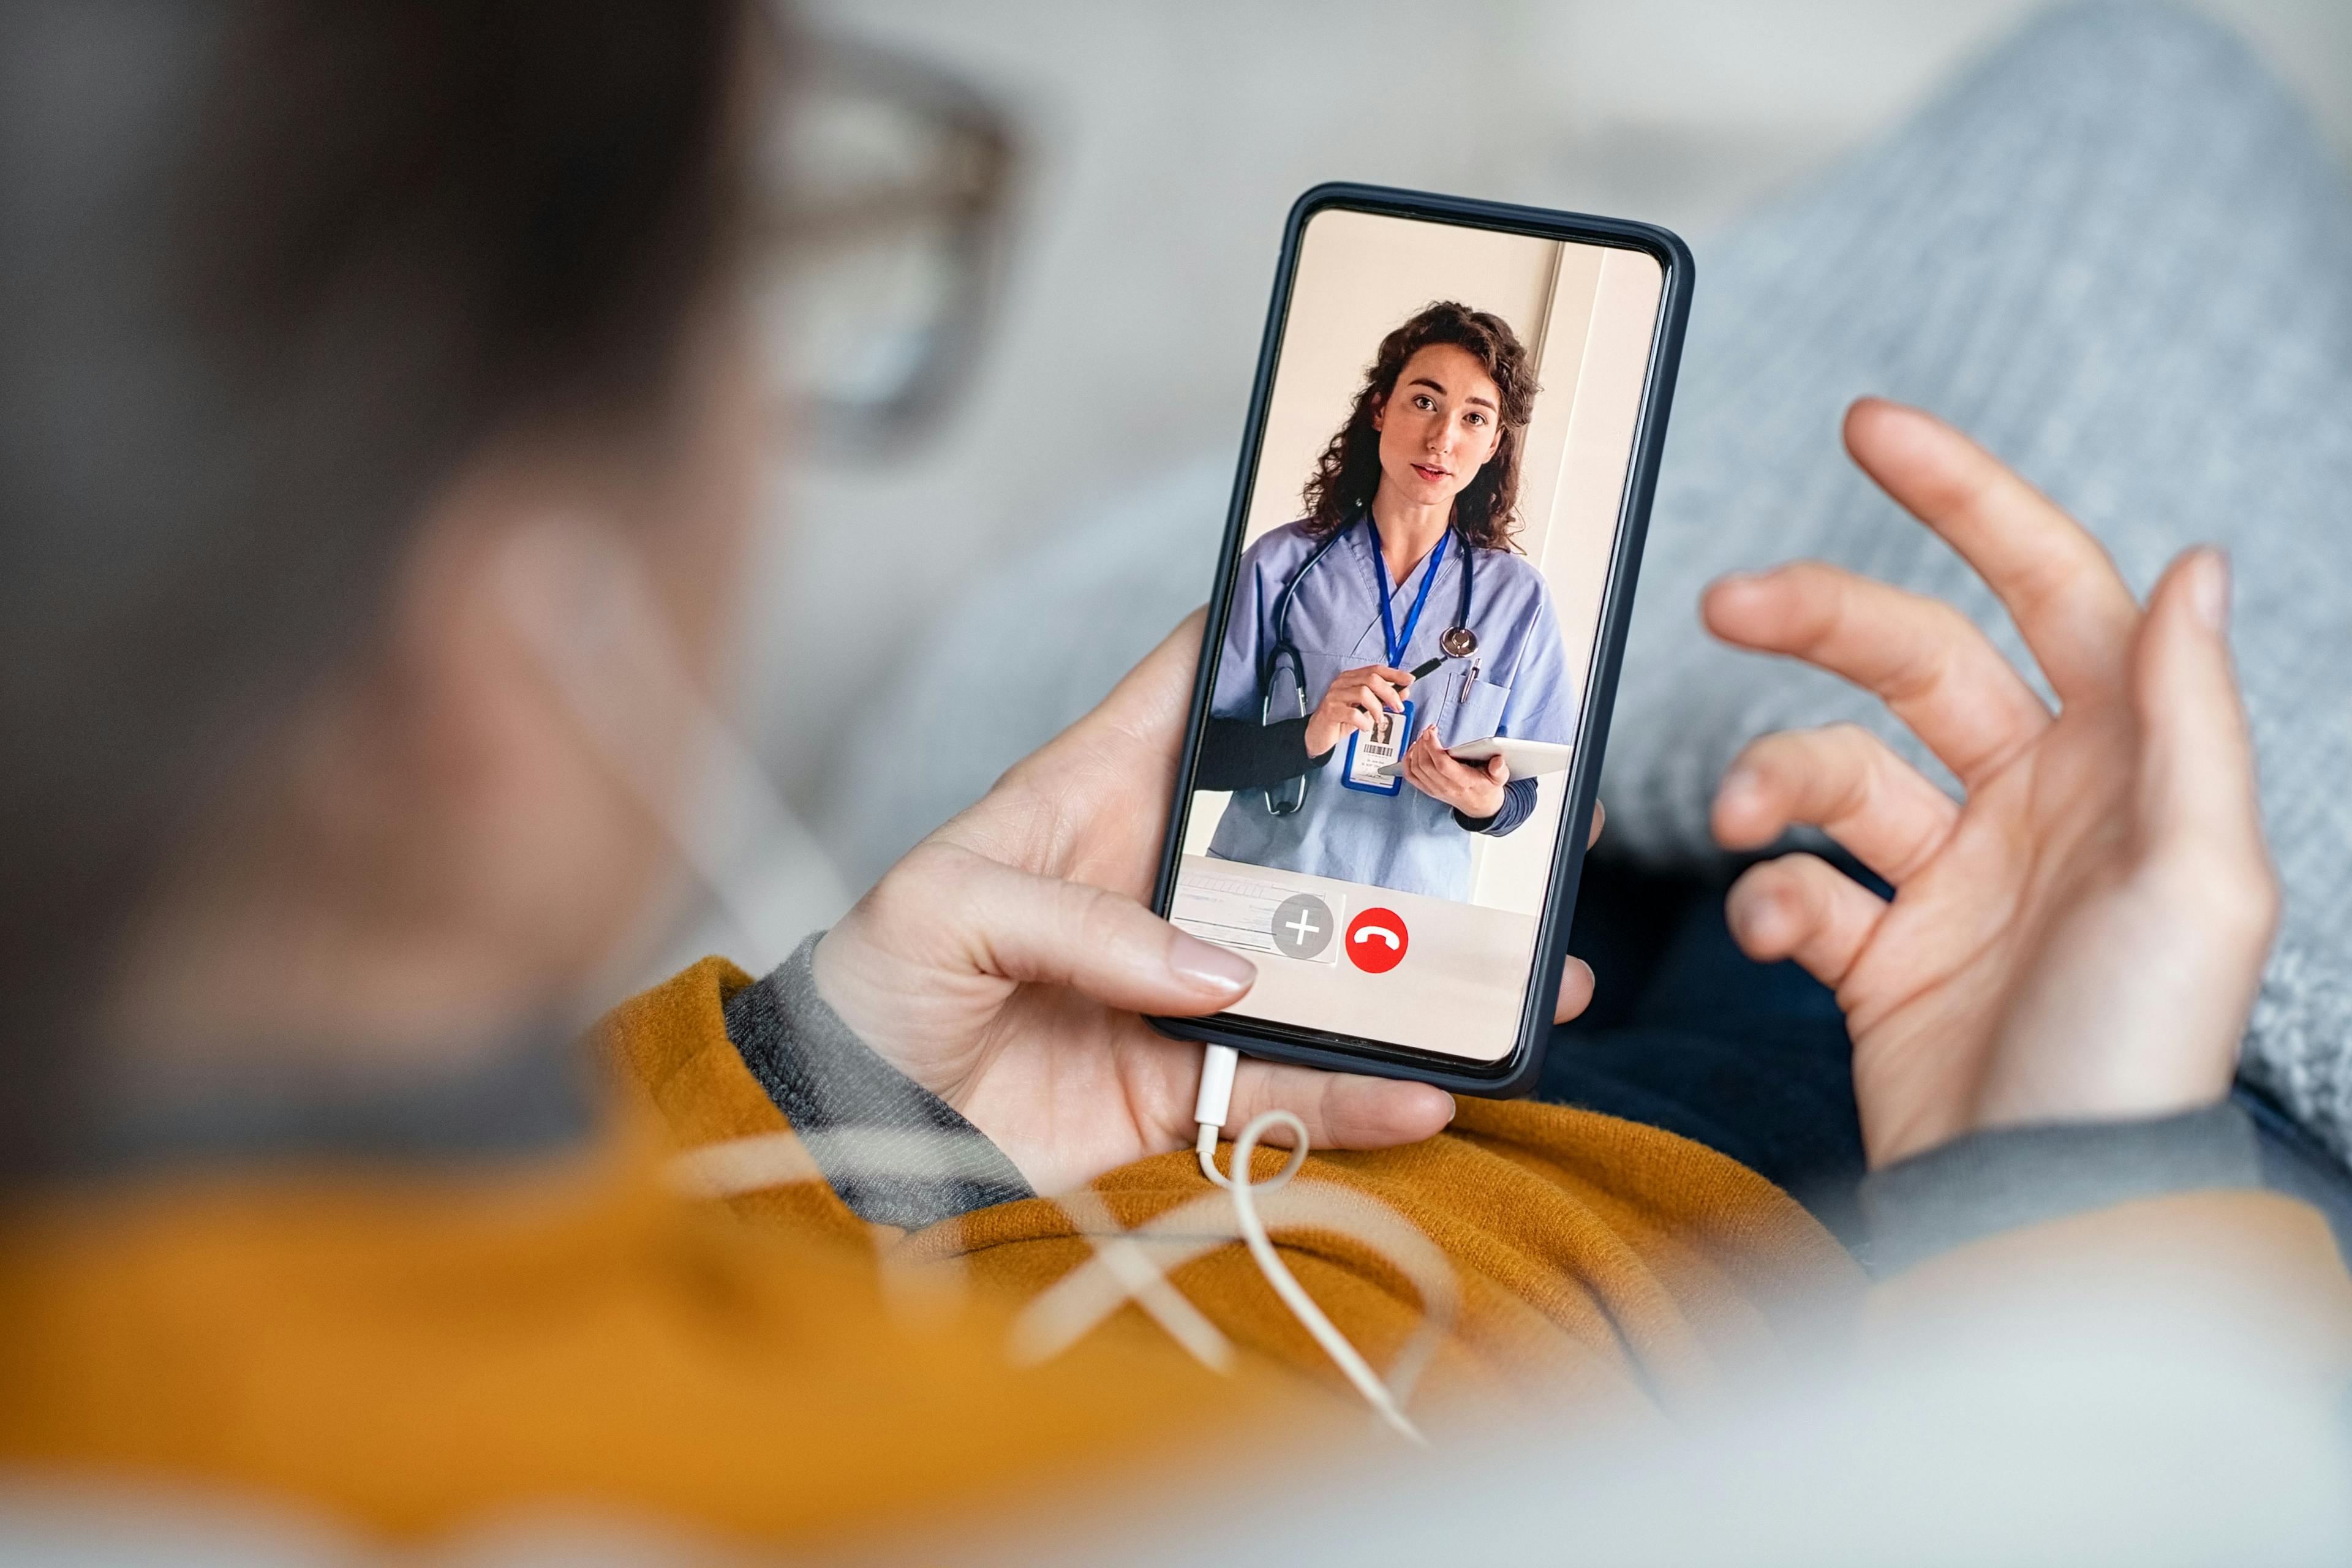 Woman on a telehealth call with a physician | Image credit: Rido - stock.adobe.com